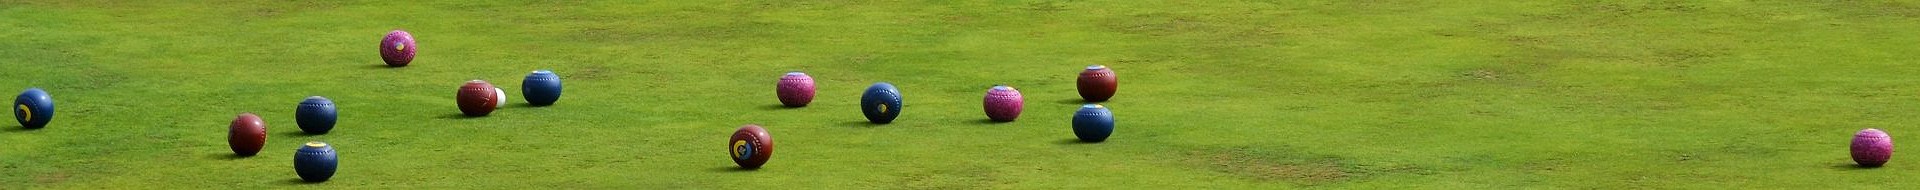 21st July 2019 2-30pm. Bowls Wiltshire